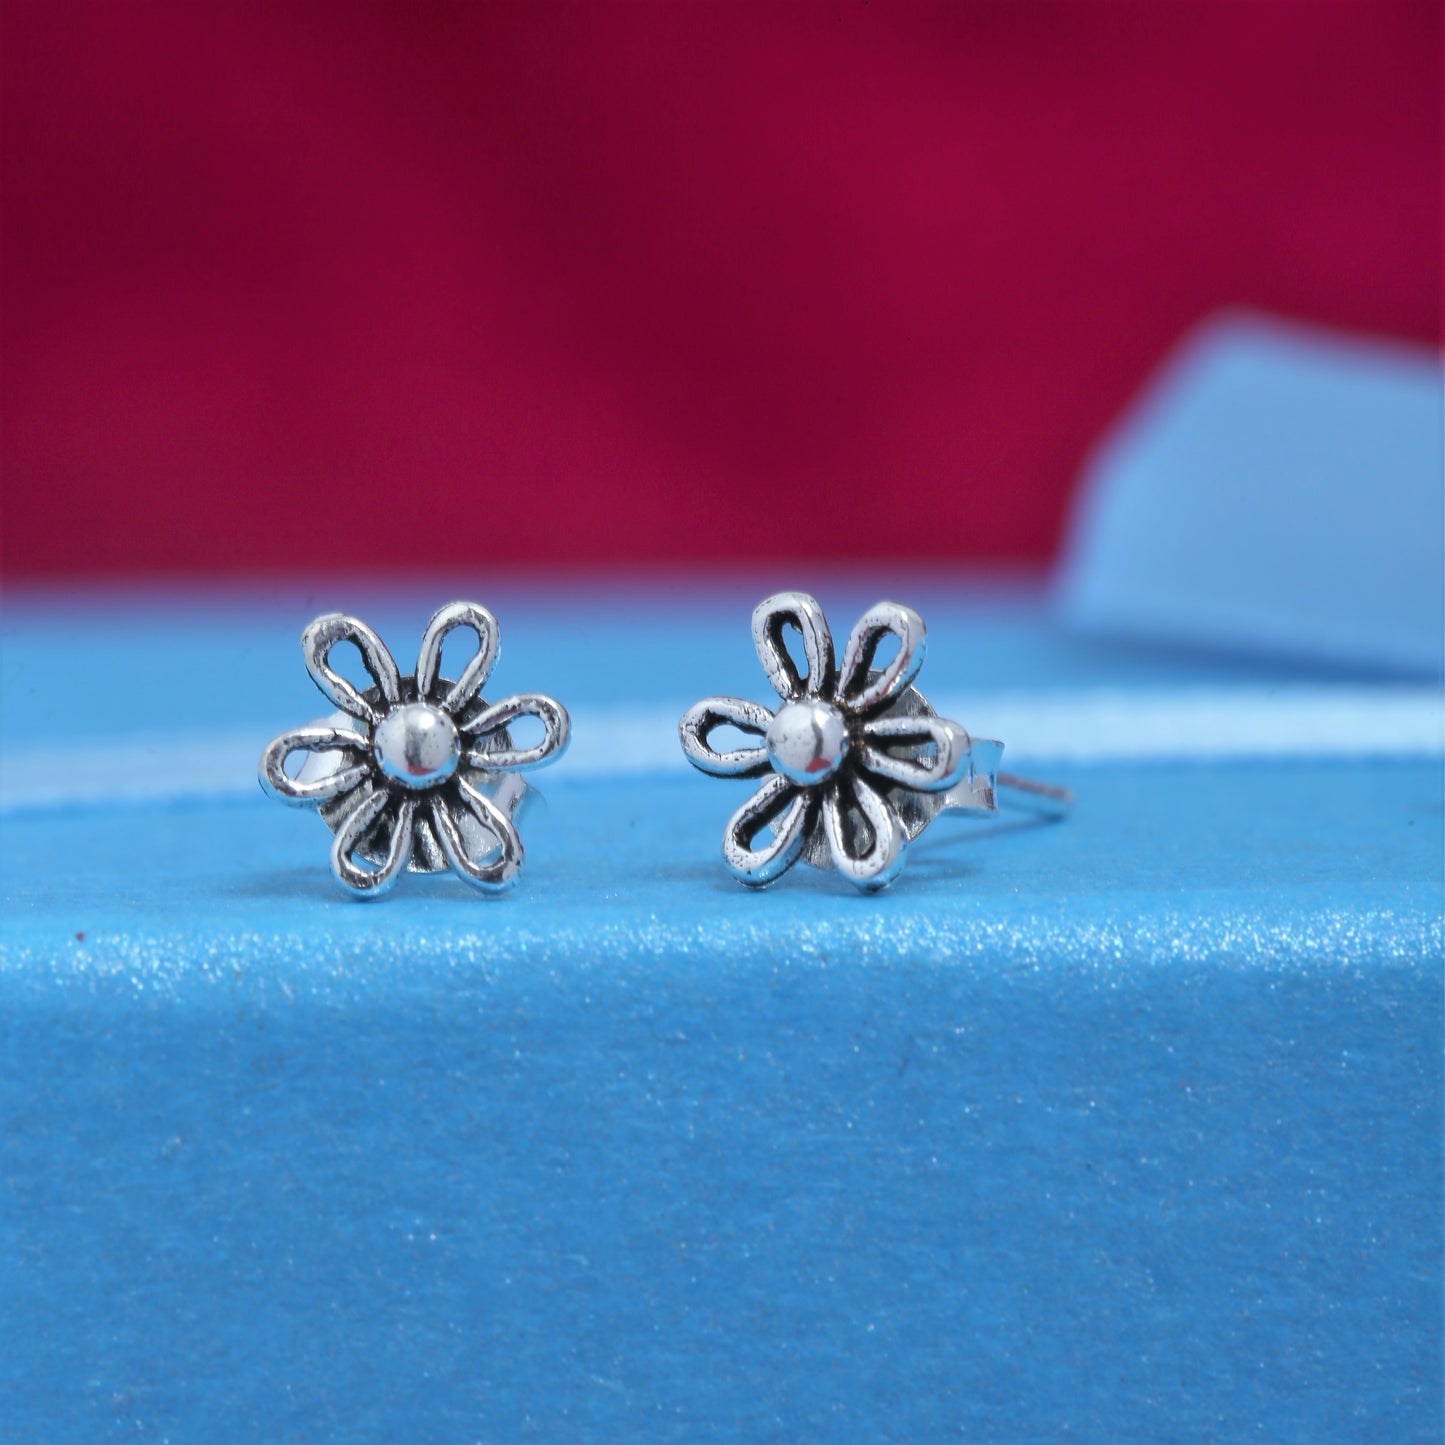 925 Sterling Silver Hypoallergenic Tiny Flower Earrings for Babies, Kids & Girls (3 to 10 years)